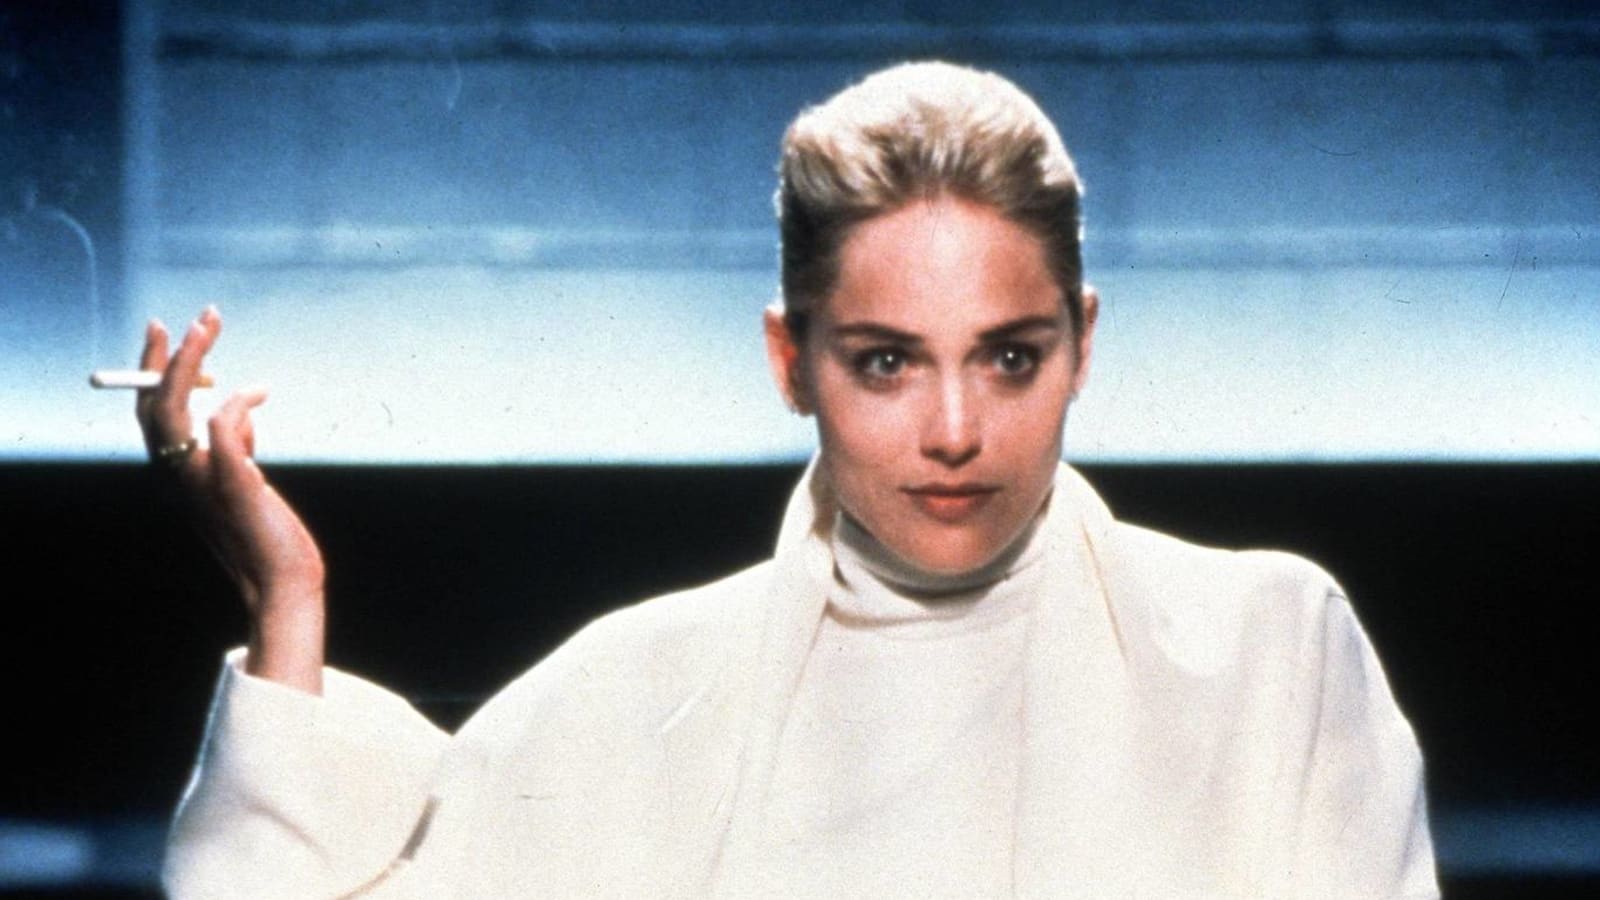 Paul Verhoeven refutes Sharon Stones' controversial claims about 'Basic Instinct' nudity